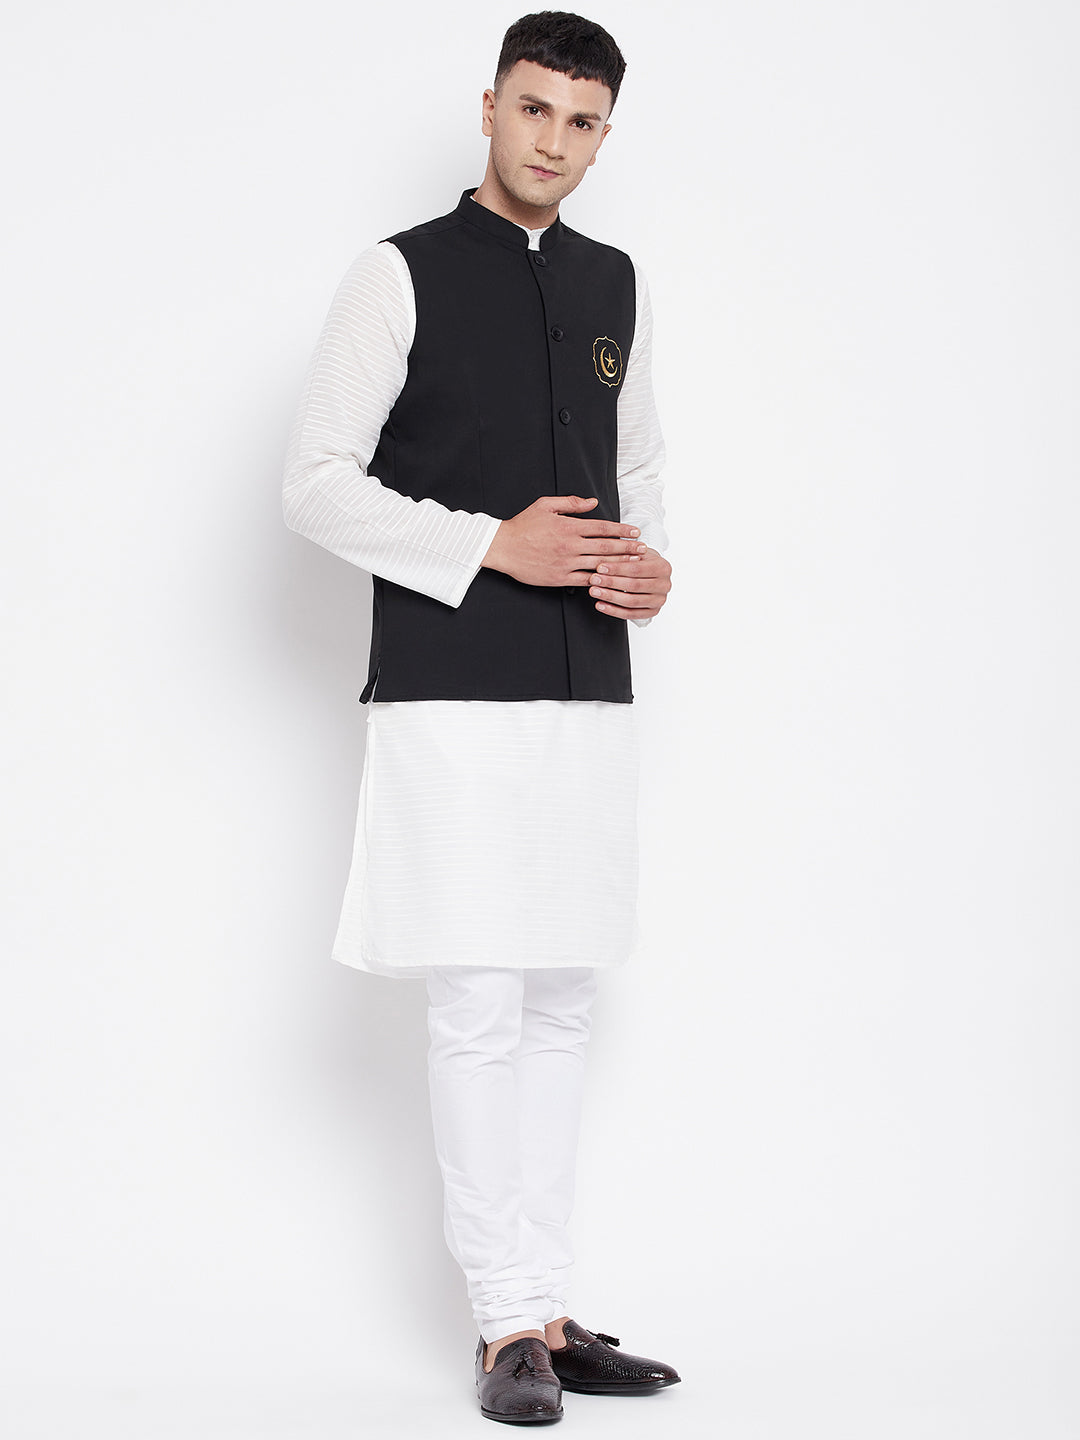 Men's White Kurta Sets with Eid Insignia Jackets(2PC) - Even Apparels